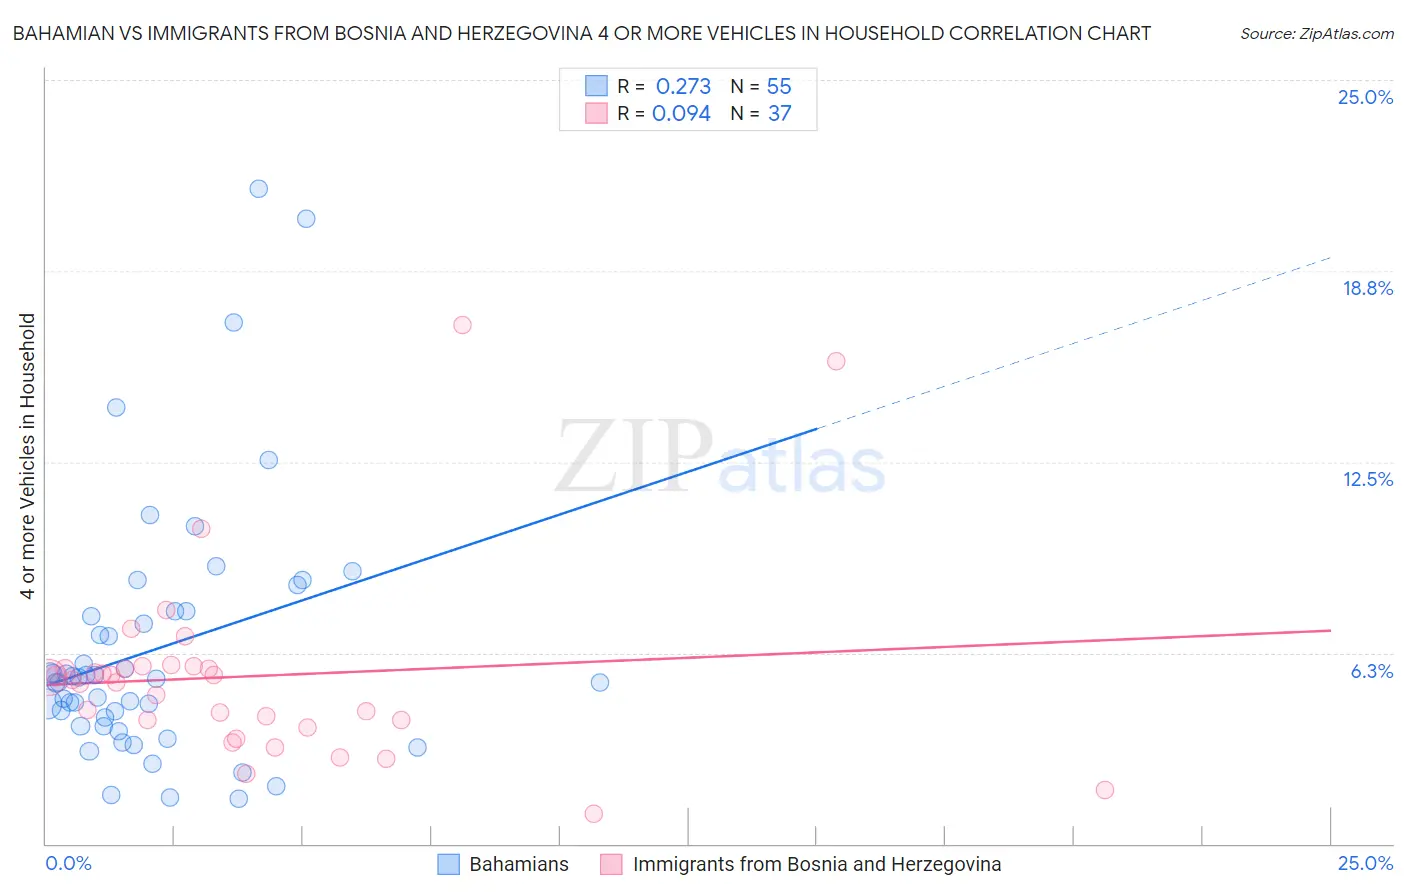 Bahamian vs Immigrants from Bosnia and Herzegovina 4 or more Vehicles in Household